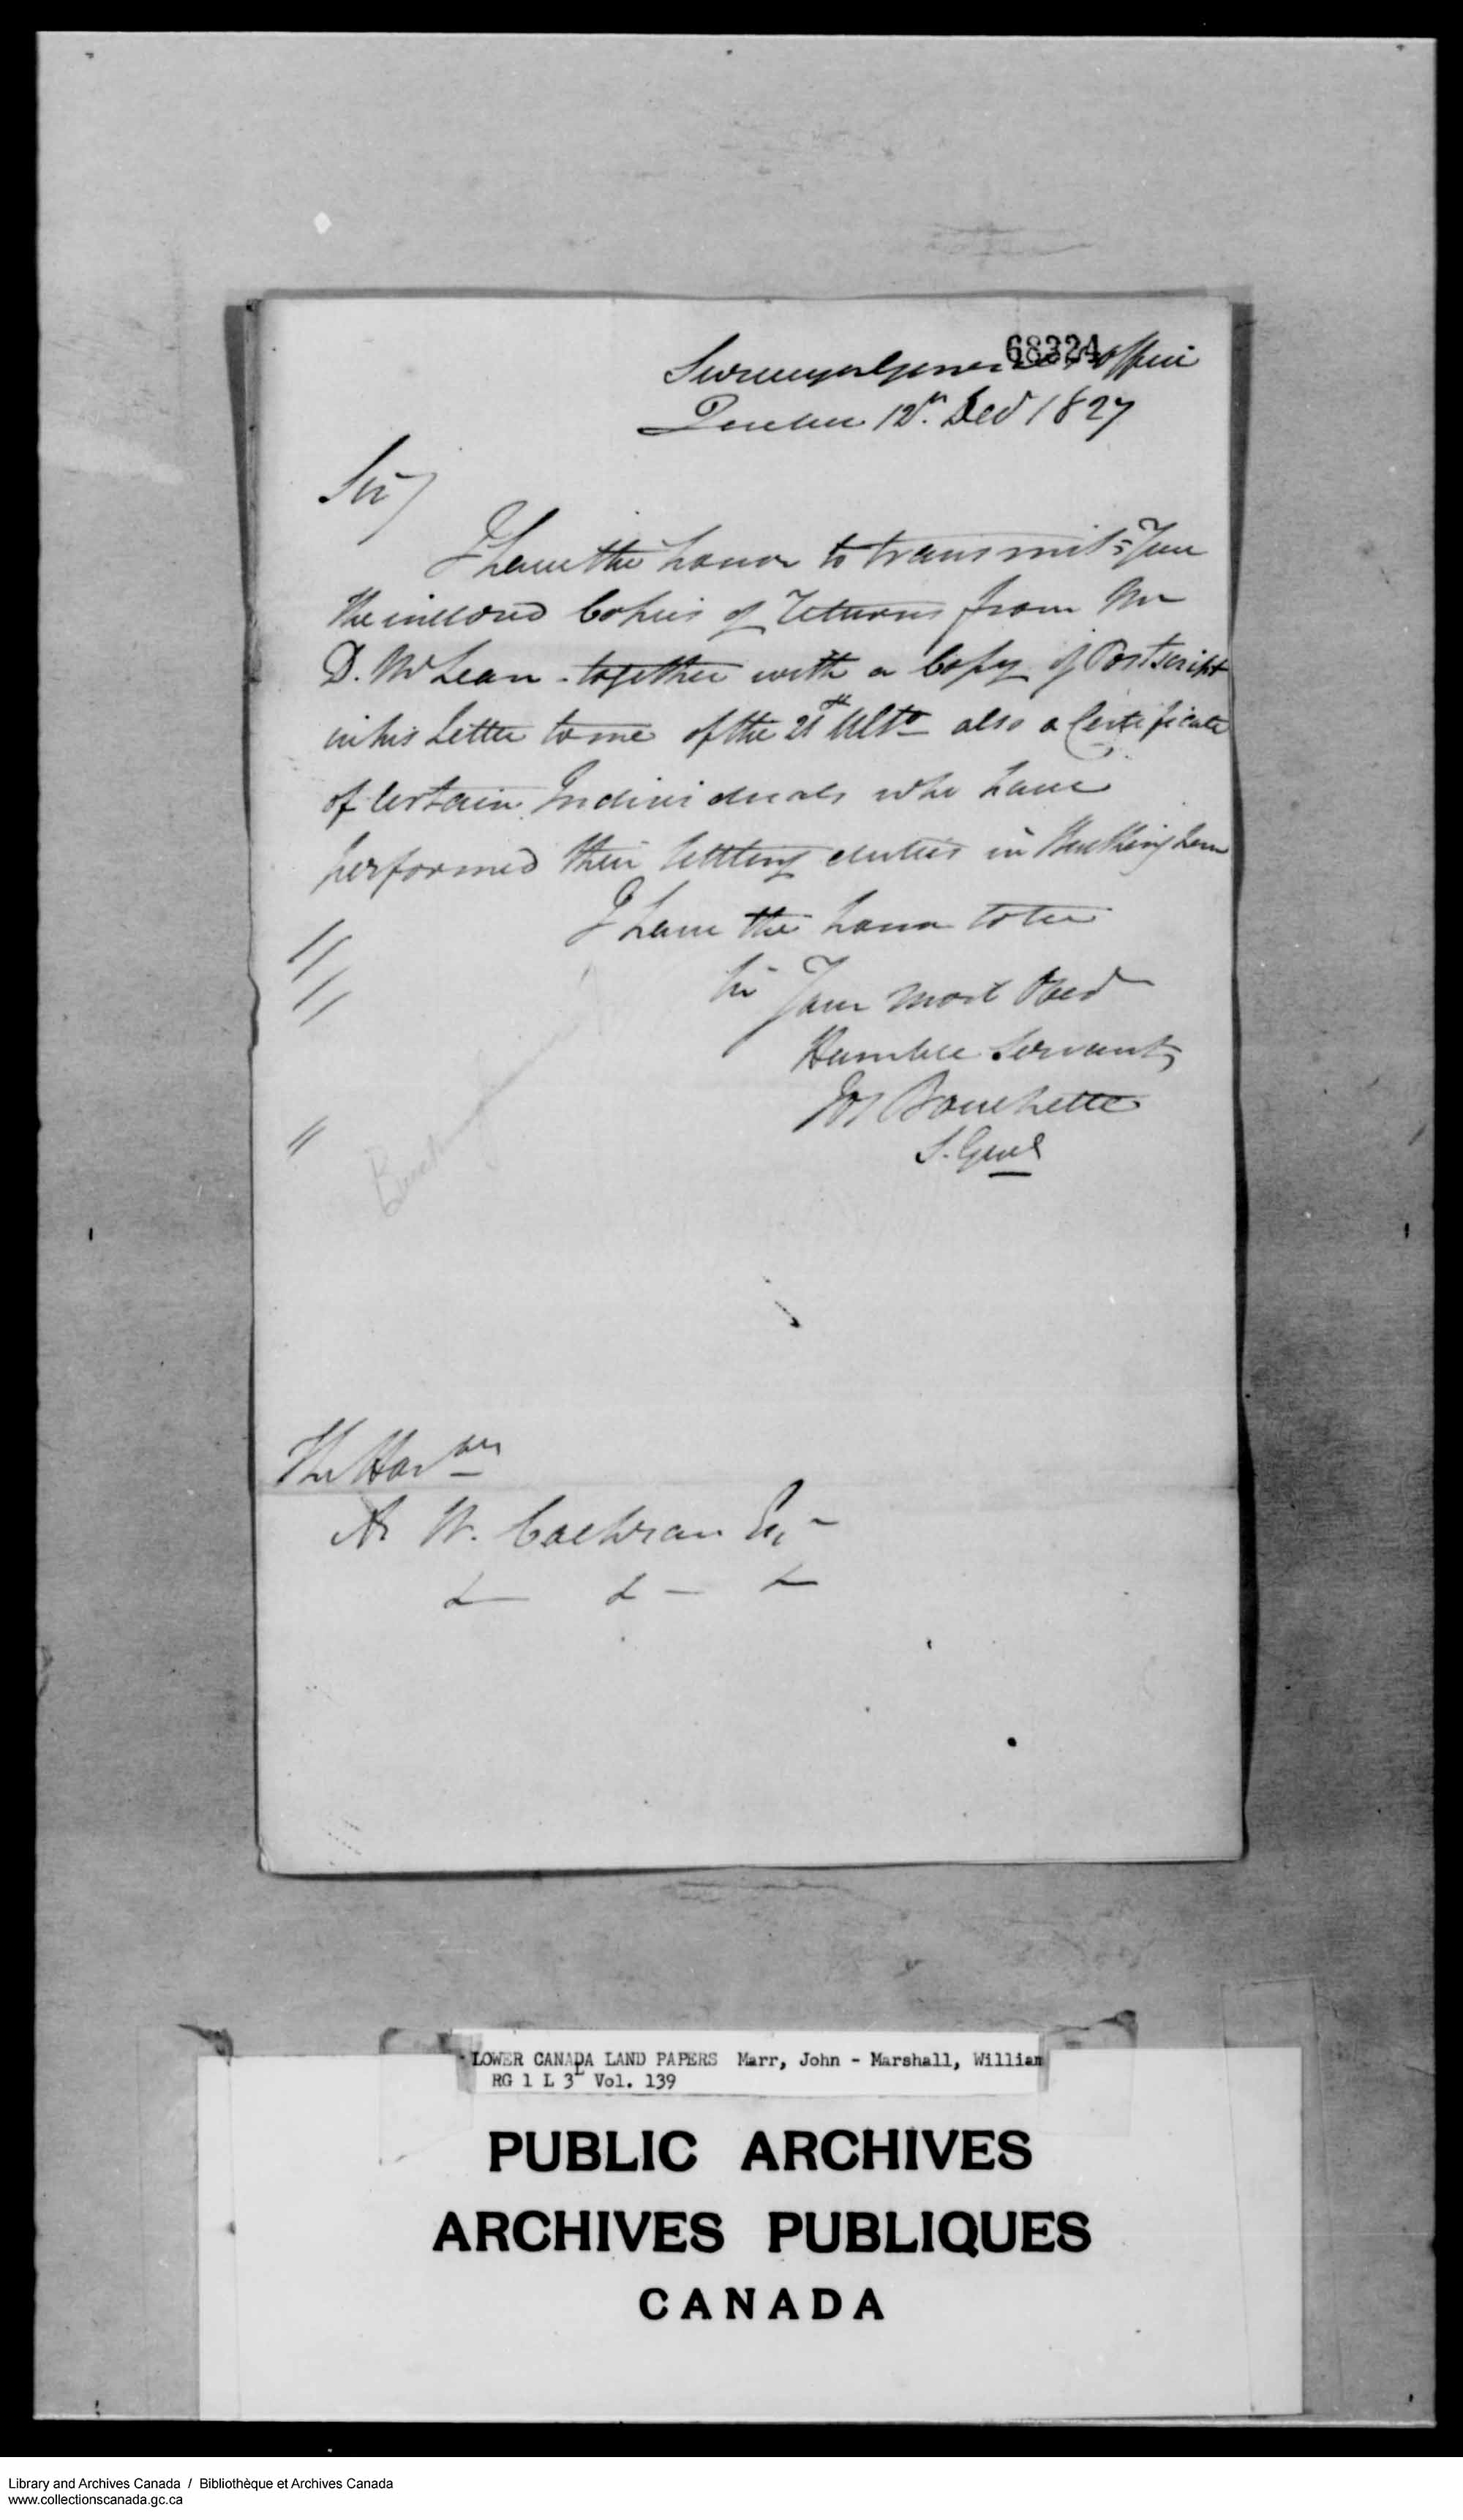 Digitized page of  for Image No.: e008713580